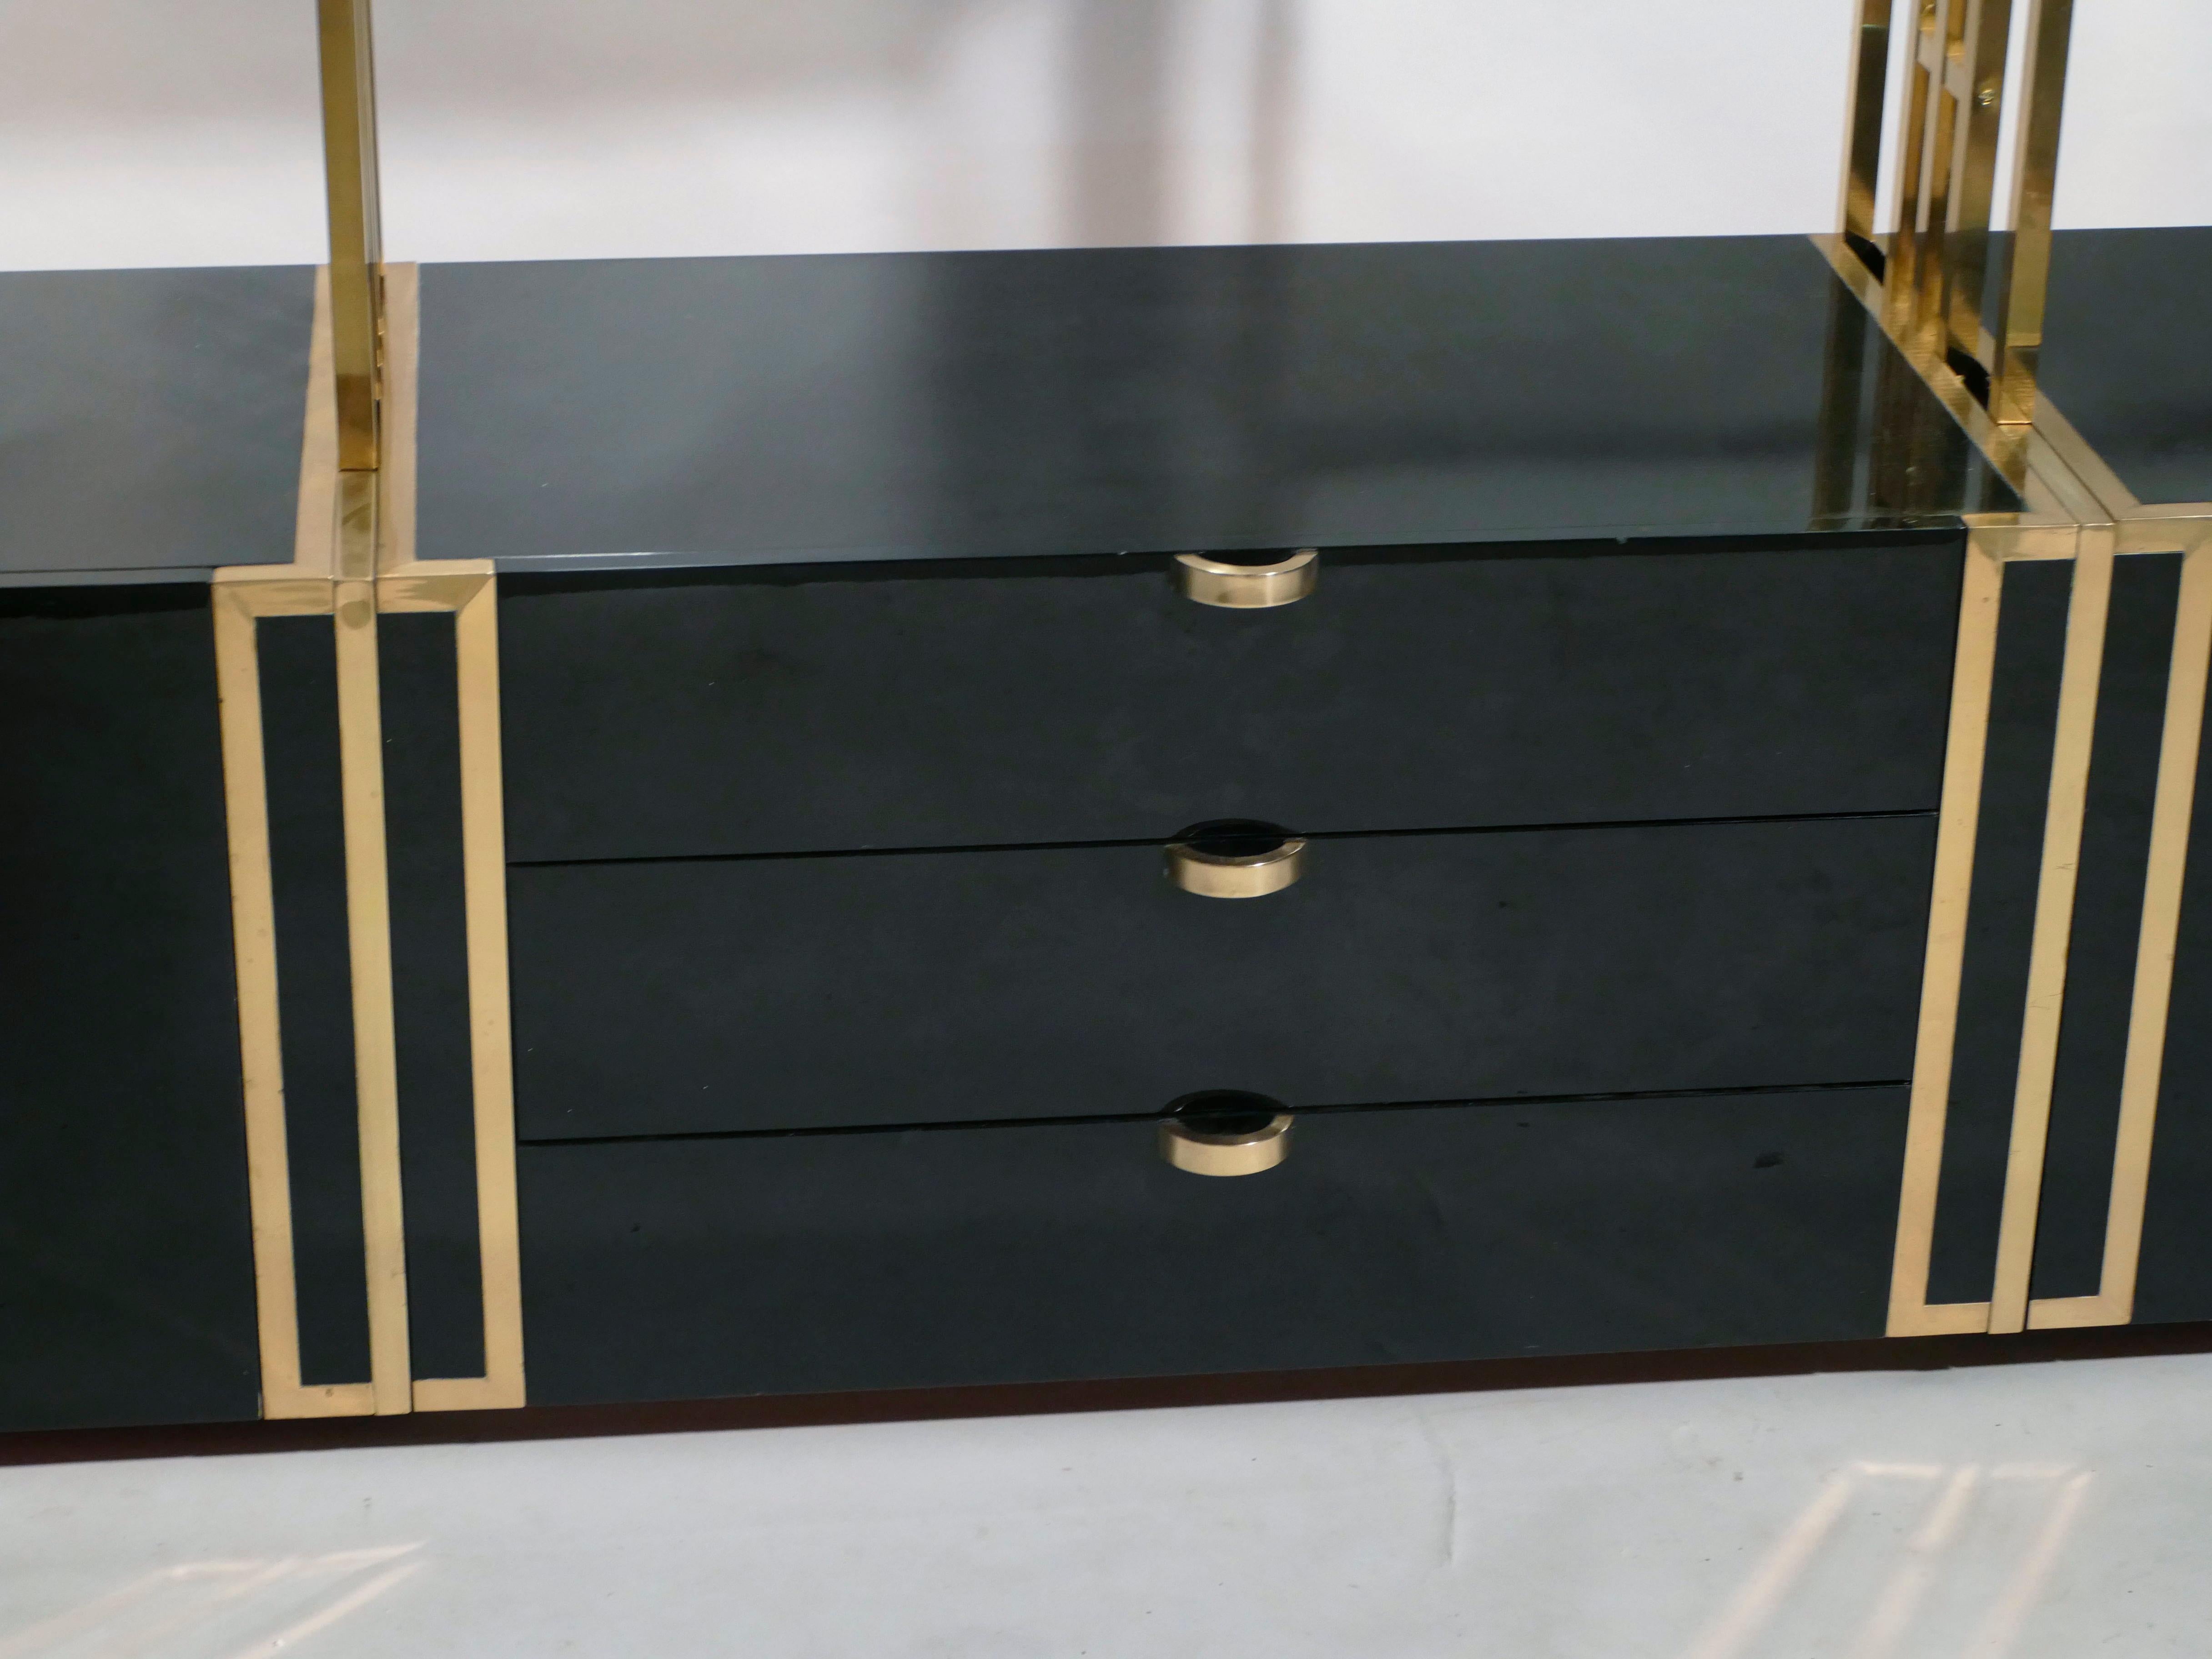 Rare Kim Moltzer French Lacquer and Brass Shelves, 1970s For Sale 1